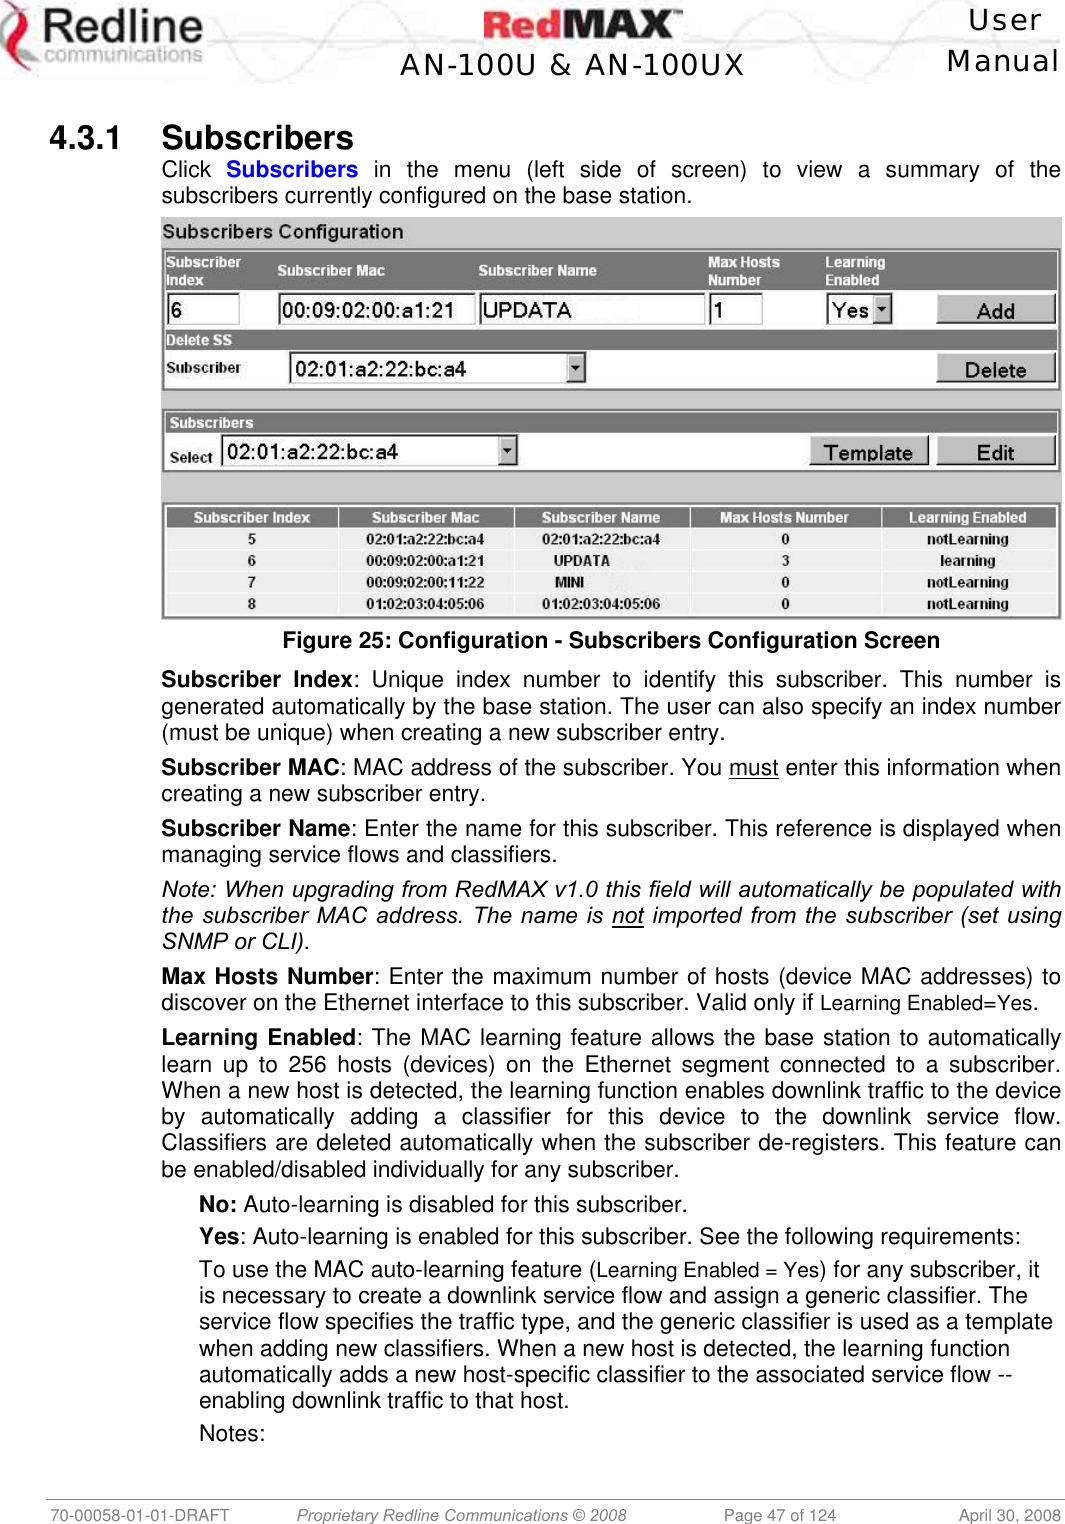    User  AN-100U &amp; AN-100UX Manual   70-00058-01-01-DRAFT  Proprietary Redline Communications © 2008   Page 47 of 124  April 30, 2008  4.3.1 Subscribers Click  Subscribers in the menu (left side of screen) to view a summary of the subscribers currently configured on the base station.  Figure 25: Configuration - Subscribers Configuration Screen Subscriber Index: Unique index number to identify this subscriber. This number is generated automatically by the base station. The user can also specify an index number (must be unique) when creating a new subscriber entry. Subscriber MAC: MAC address of the subscriber. You must enter this information when creating a new subscriber entry. Subscriber Name: Enter the name for this subscriber. This reference is displayed when managing service flows and classifiers.  Note: When upgrading from RedMAX v1.0 this field will automatically be populated with the subscriber MAC address. The name is not imported from the subscriber (set using SNMP or CLI). Max Hosts Number: Enter the maximum number of hosts (device MAC addresses) to discover on the Ethernet interface to this subscriber. Valid only if Learning Enabled=Yes. Learning Enabled: The MAC learning feature allows the base station to automatically learn up to 256 hosts (devices) on the Ethernet segment connected to a subscriber. When a new host is detected, the learning function enables downlink traffic to the device by automatically adding a classifier for this device to the downlink service flow. Classifiers are deleted automatically when the subscriber de-registers. This feature can be enabled/disabled individually for any subscriber. No: Auto-learning is disabled for this subscriber. Yes: Auto-learning is enabled for this subscriber. See the following requirements: To use the MAC auto-learning feature (Learning Enabled = Yes) for any subscriber, it is necessary to create a downlink service flow and assign a generic classifier. The service flow specifies the traffic type, and the generic classifier is used as a template when adding new classifiers. When a new host is detected, the learning function automatically adds a new host-specific classifier to the associated service flow -- enabling downlink traffic to that host. Notes: 